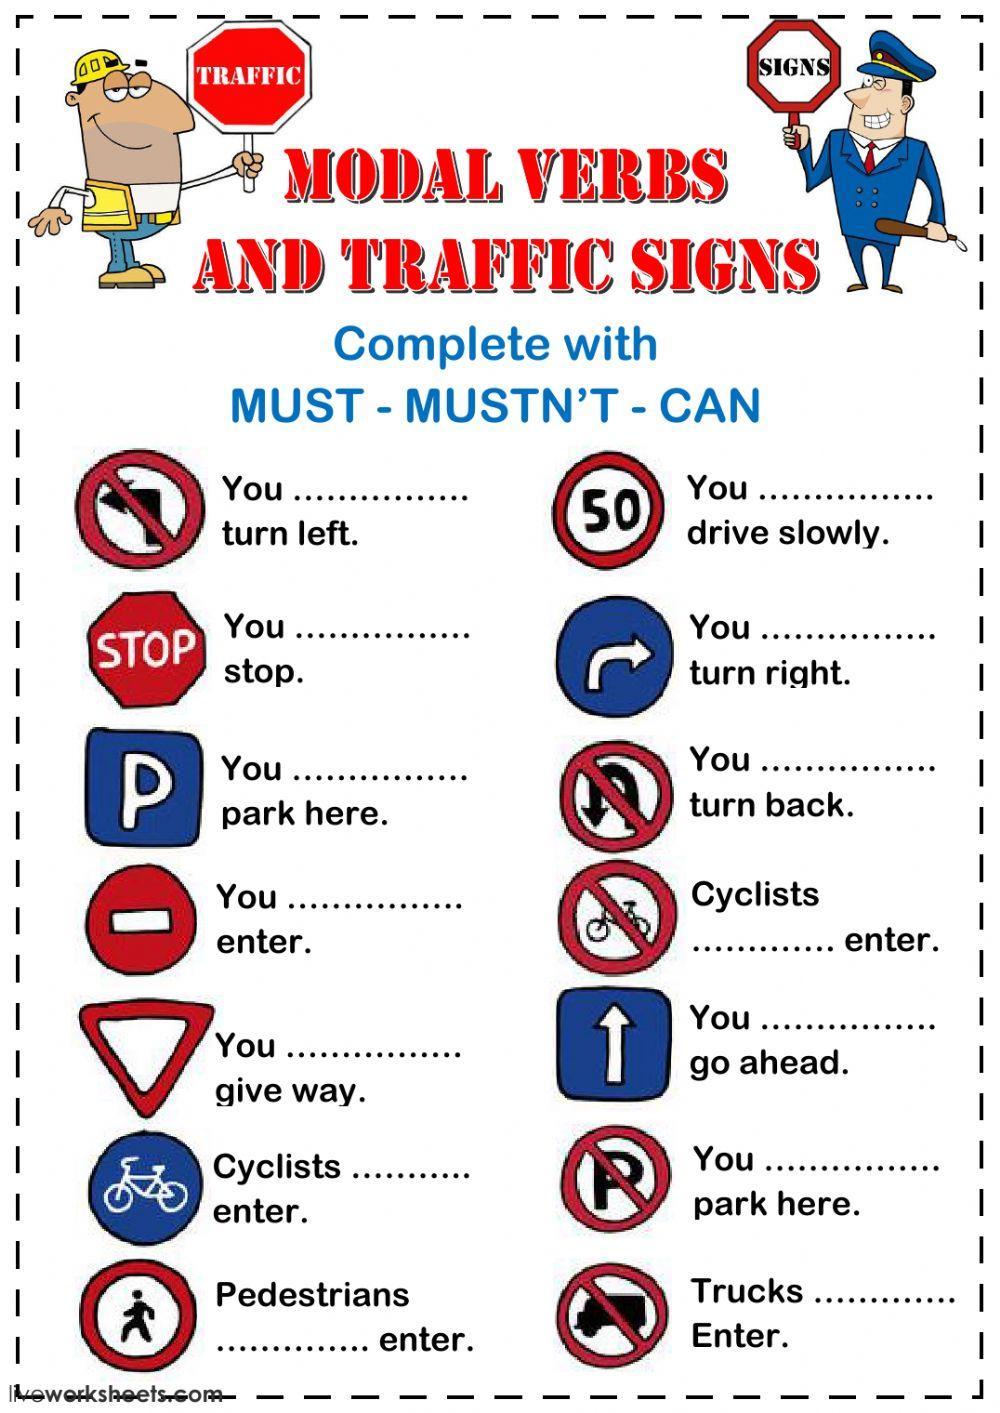 Modal Verbs and Traffic Signs 2